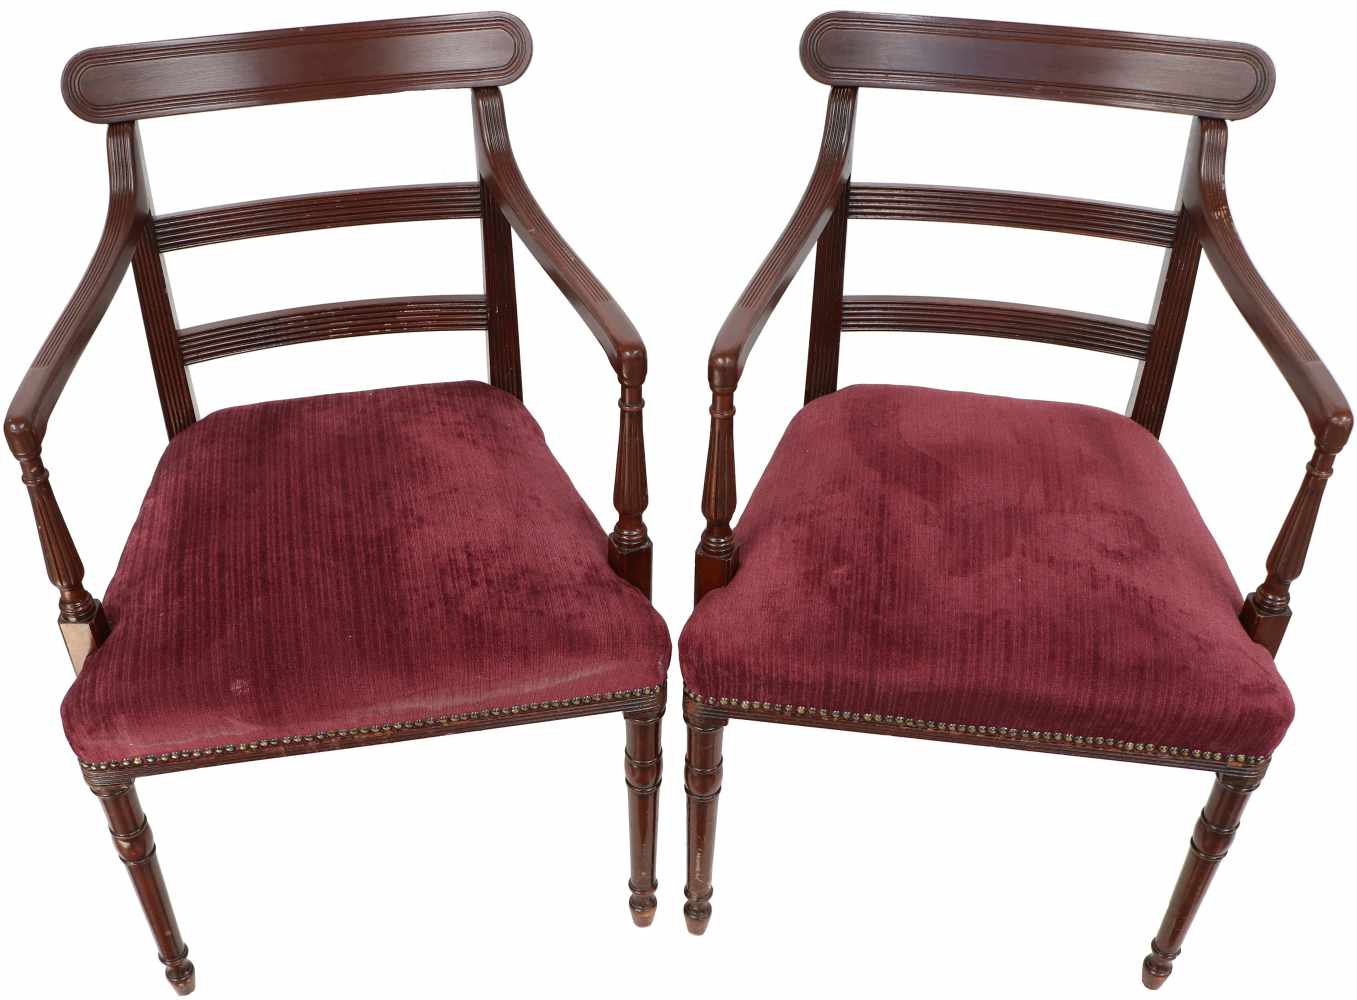 zurückgezogenA set of four chairs and a round table. Regency period style, 20th century. - Image 2 of 4